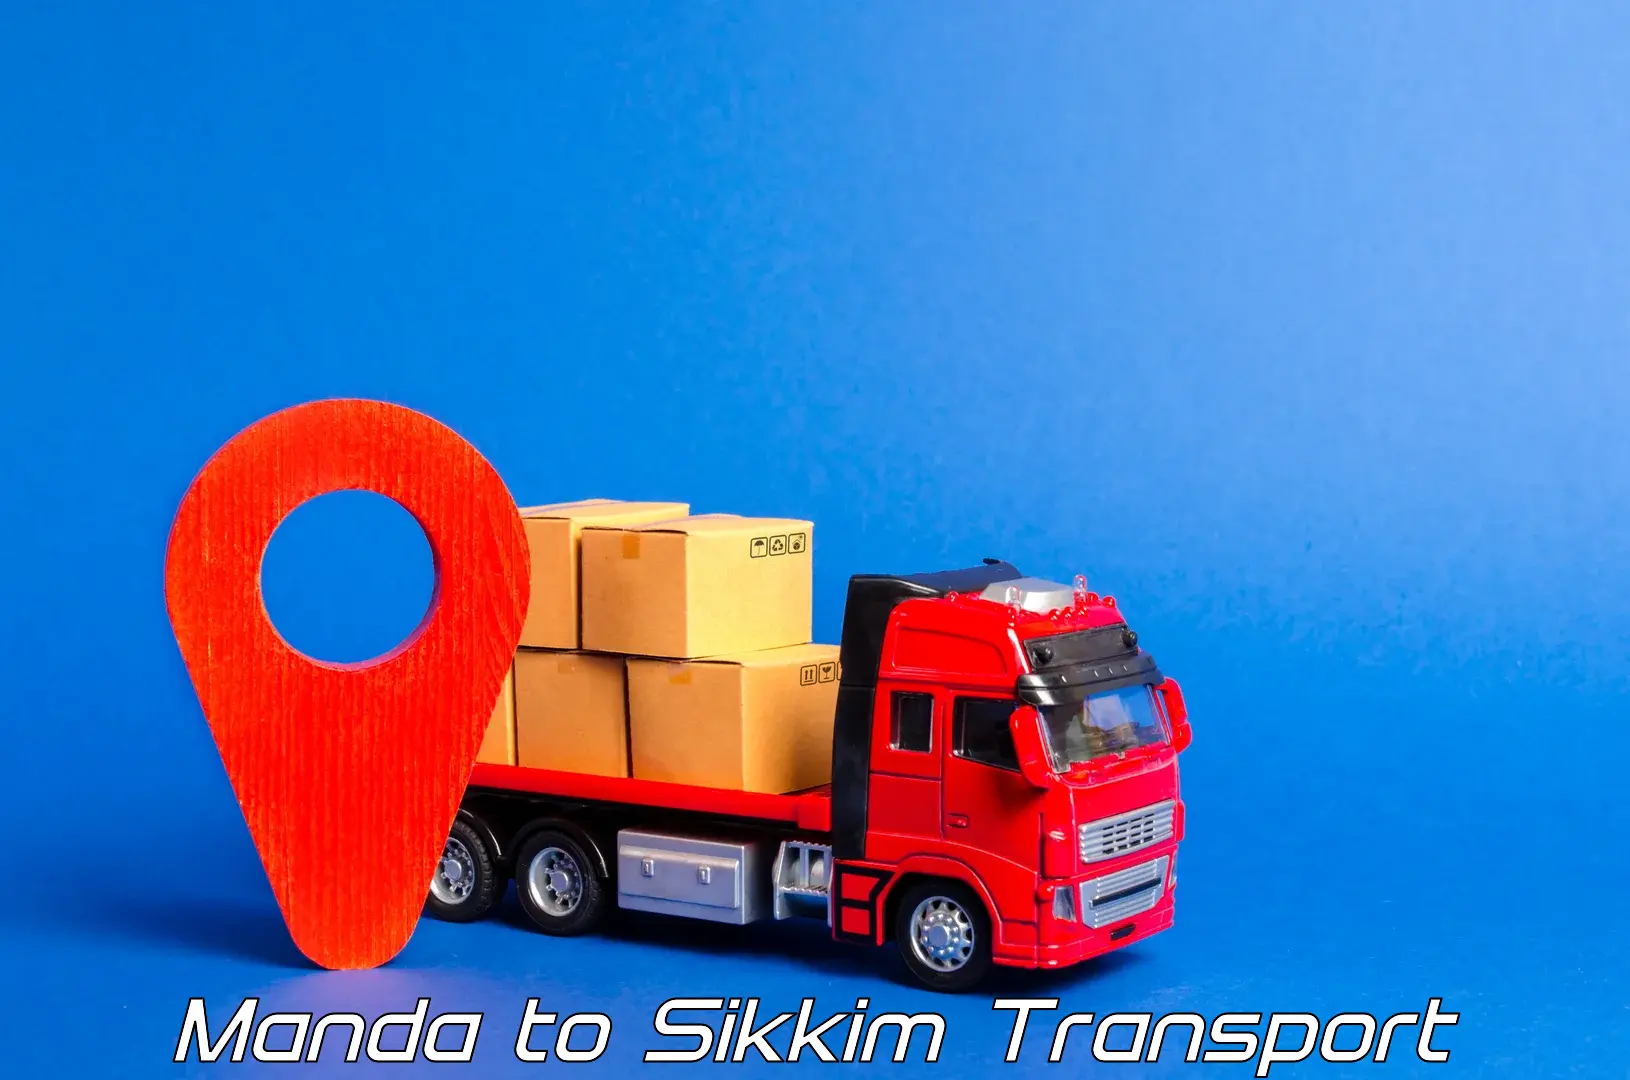 Transport bike from one state to another Manda to Sikkim